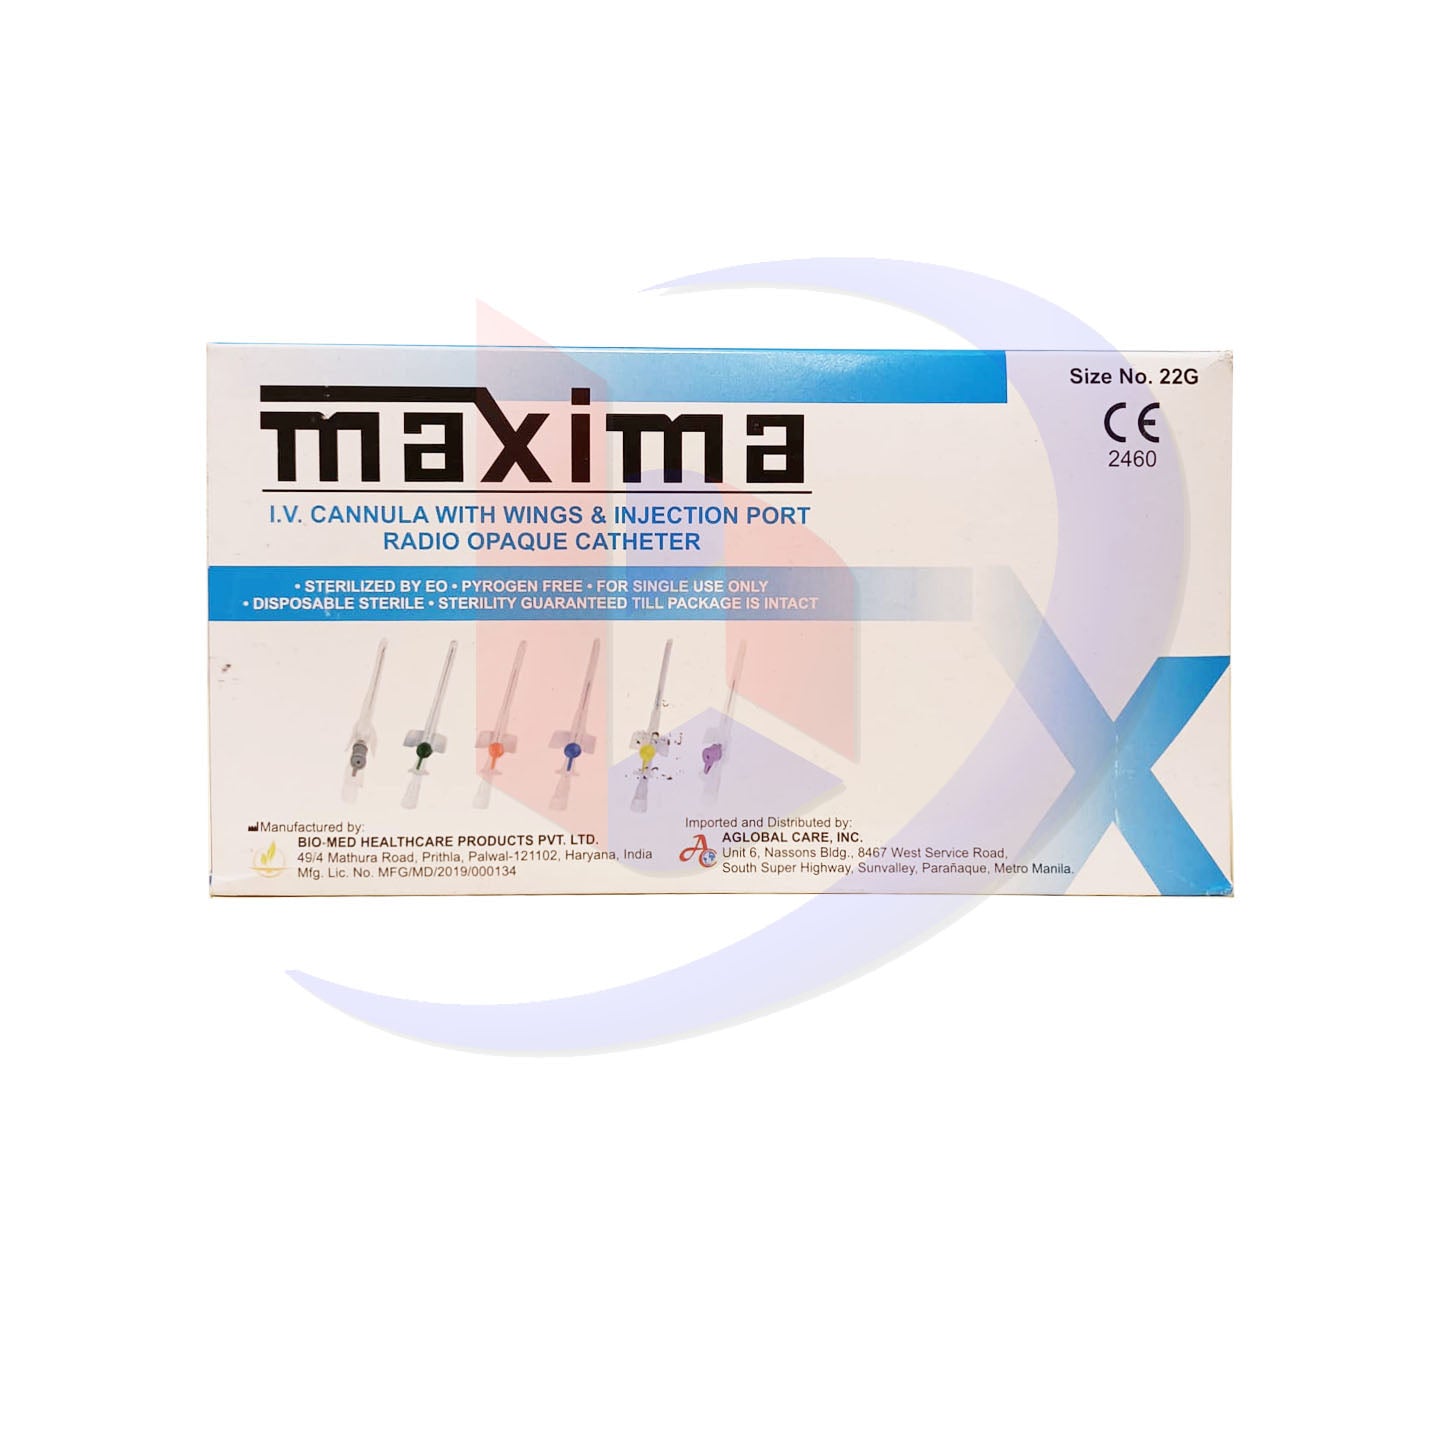 IV Cannula with Wings & Injection Port Radio Opaque Catheter (Maxima) Sterilized by EO Size No. 22G by 100's